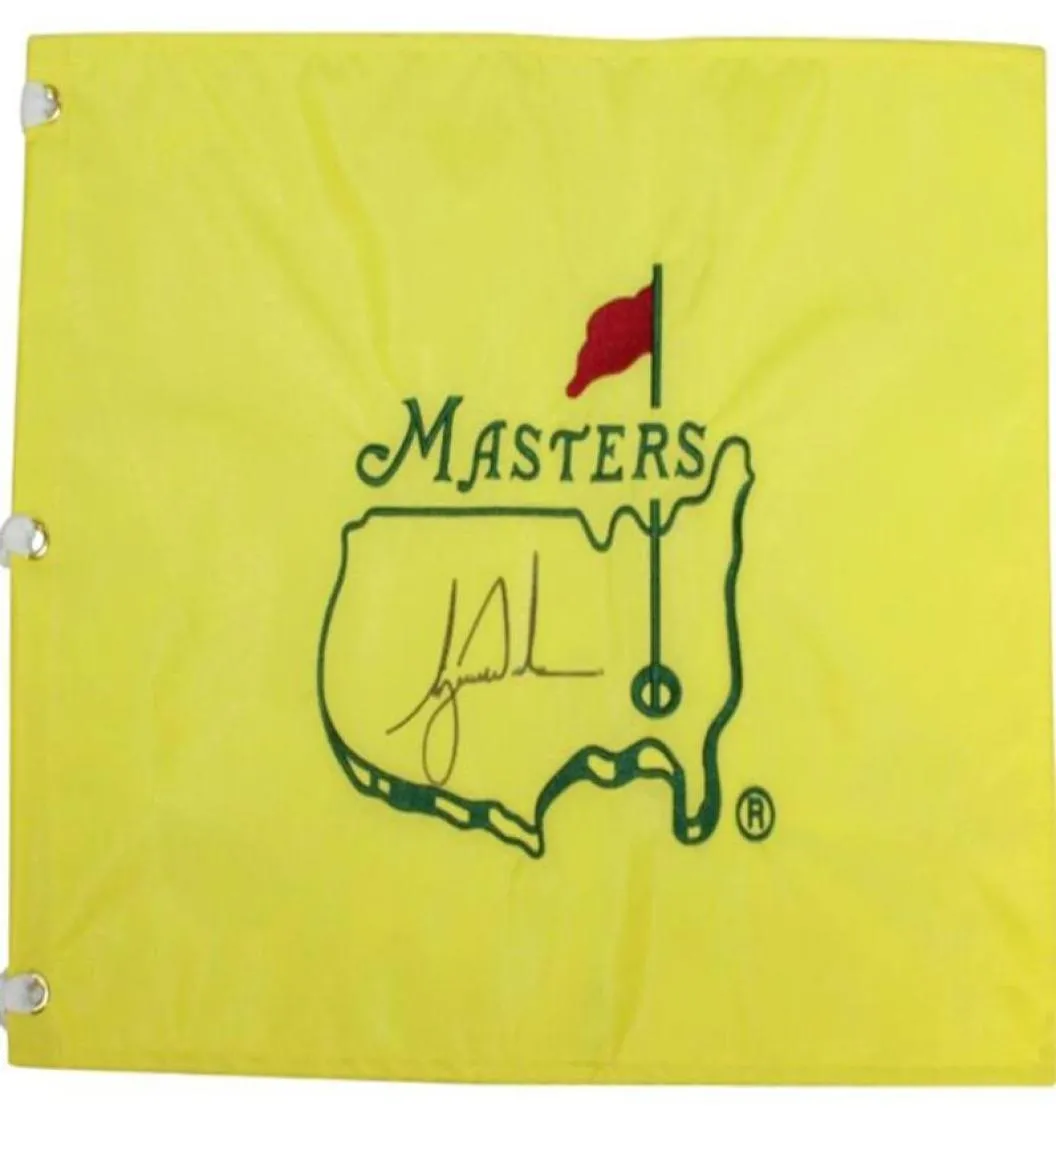 Tees Tiger Woods Signed Autograph signatured Autographed auto 1997 2001 2006 2005 2019 Championship Masters Open 2000 British Open8539735